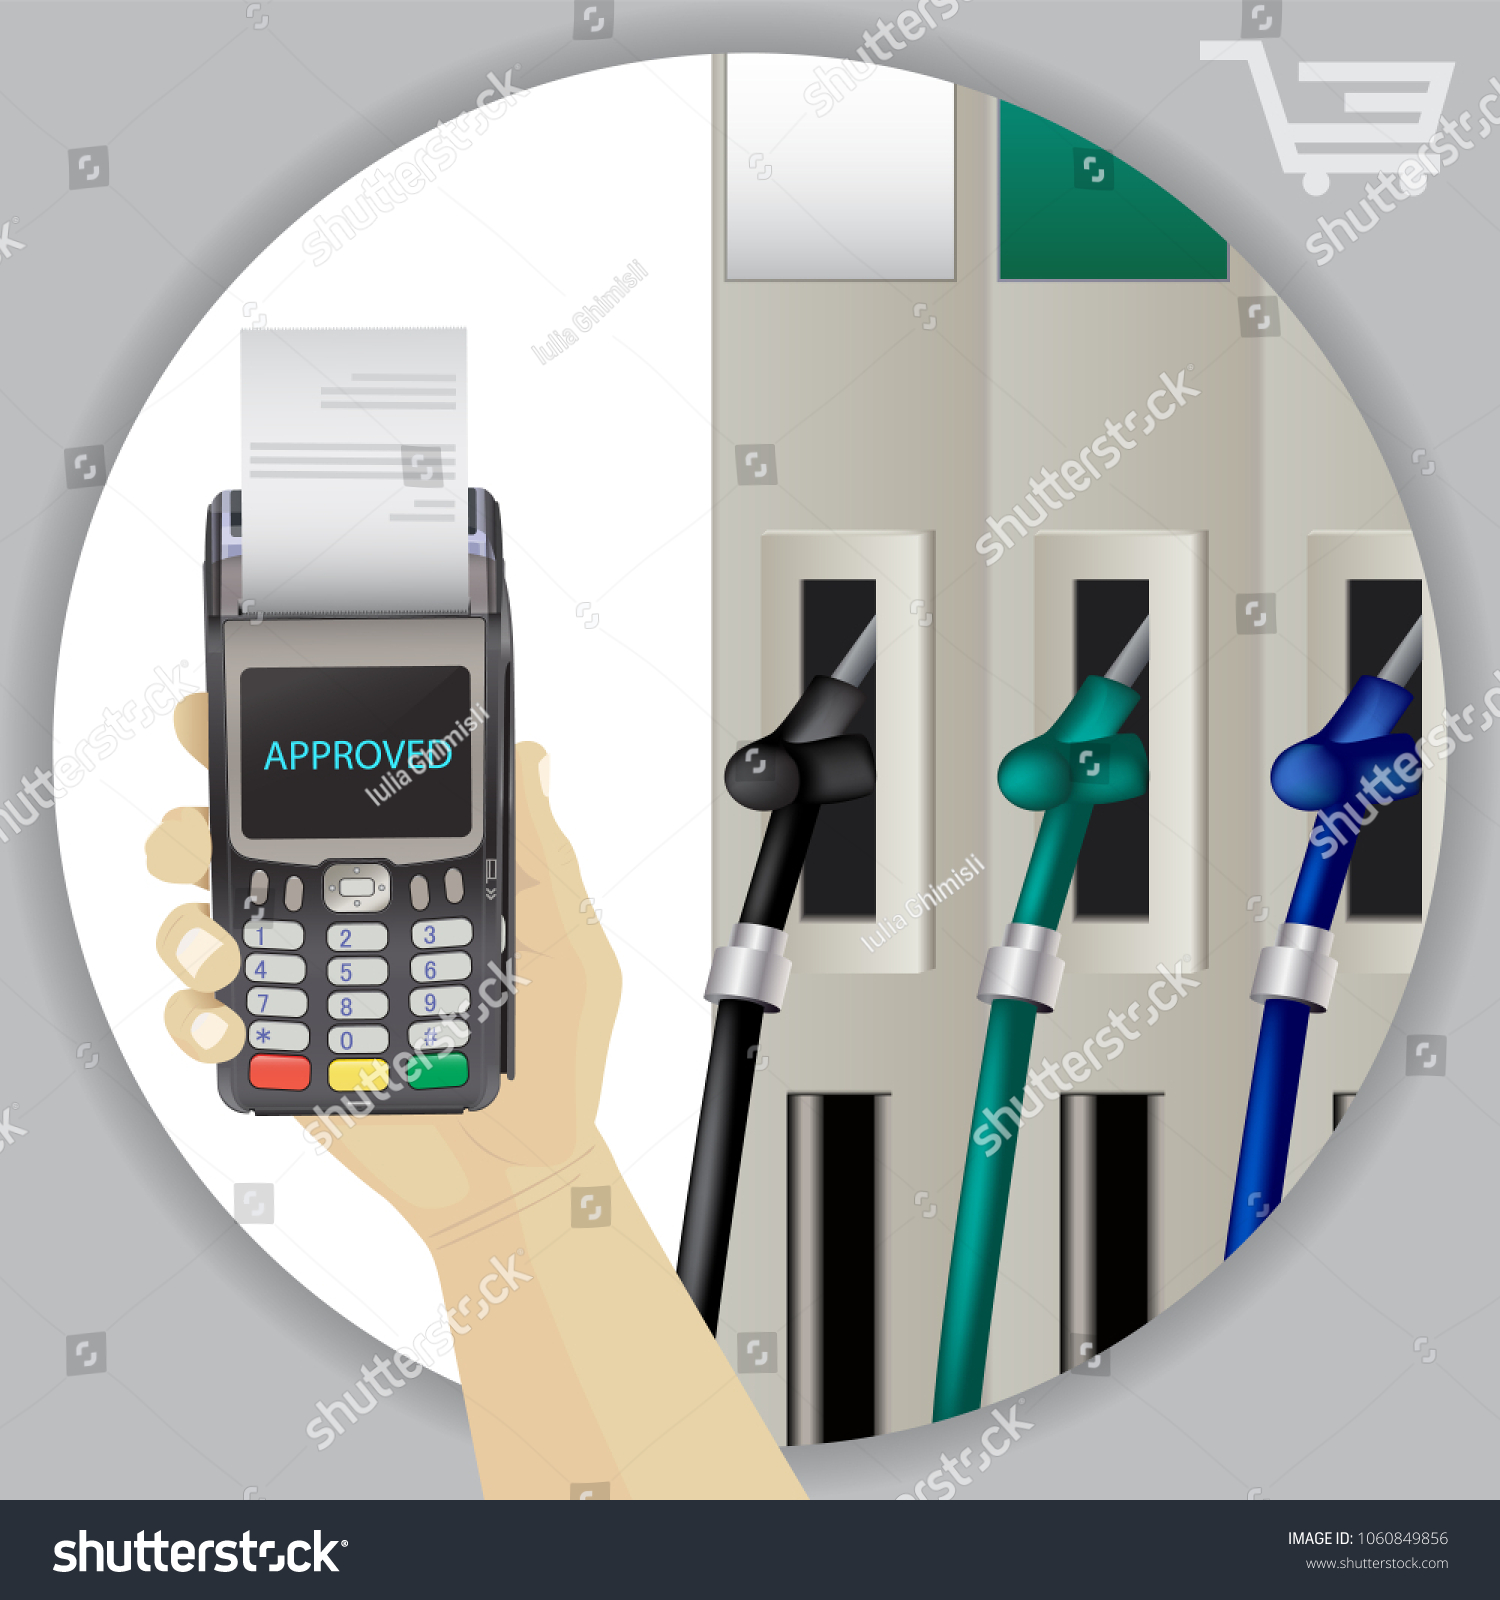 SVG of Fuel Dispenser And Fuel Nozzles At A Filling Station To Pump Petrol, Gas, Diesel. Contactless Wireless Payment. Pay For Fuel Concept. Petrol Pumps. POS Terminal. Vector svg